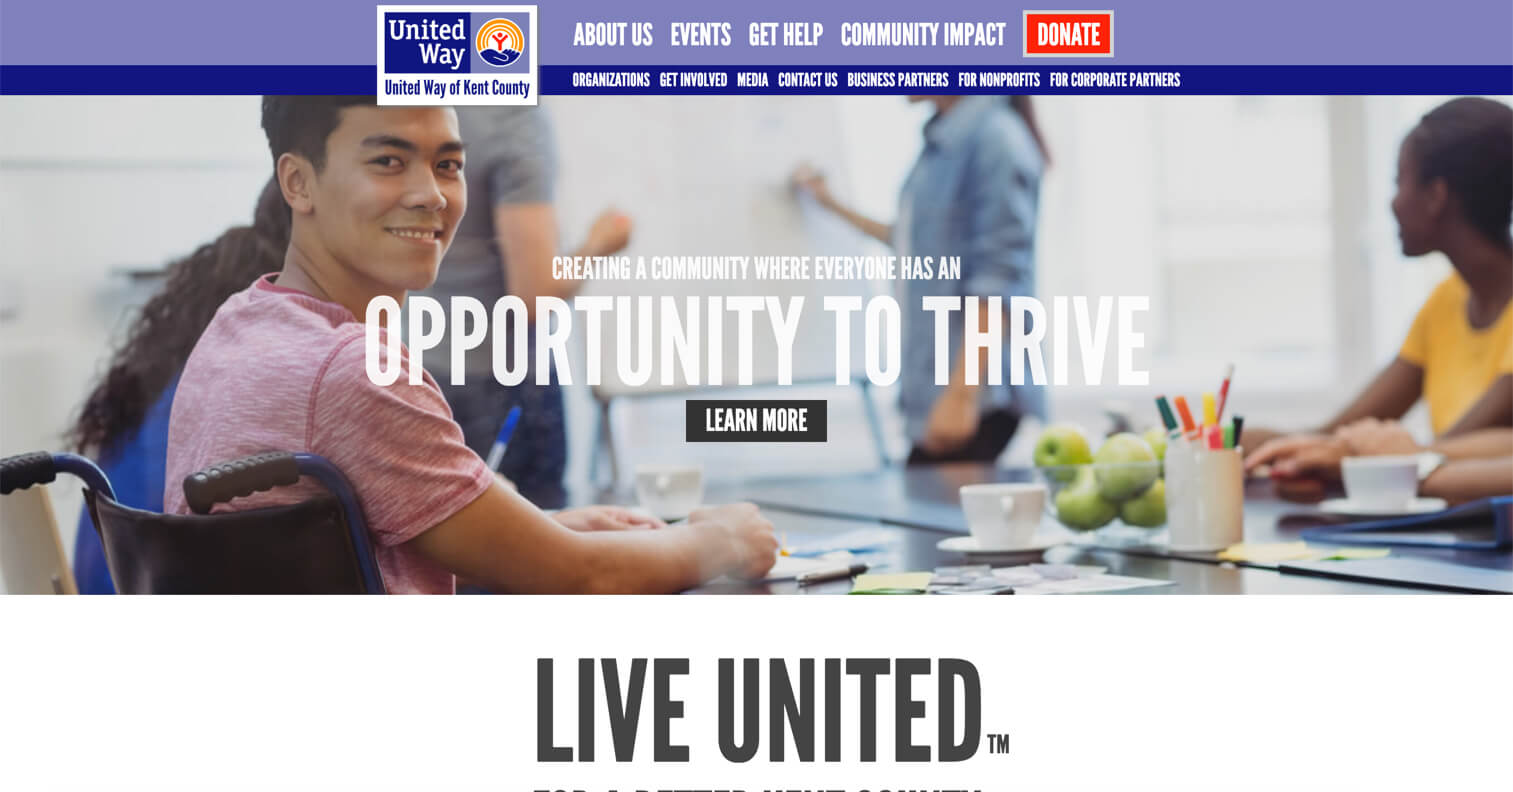 The United Way of Kent County's new website, designed by Mullin/Ashley Associates, wins two marketing communications awards.